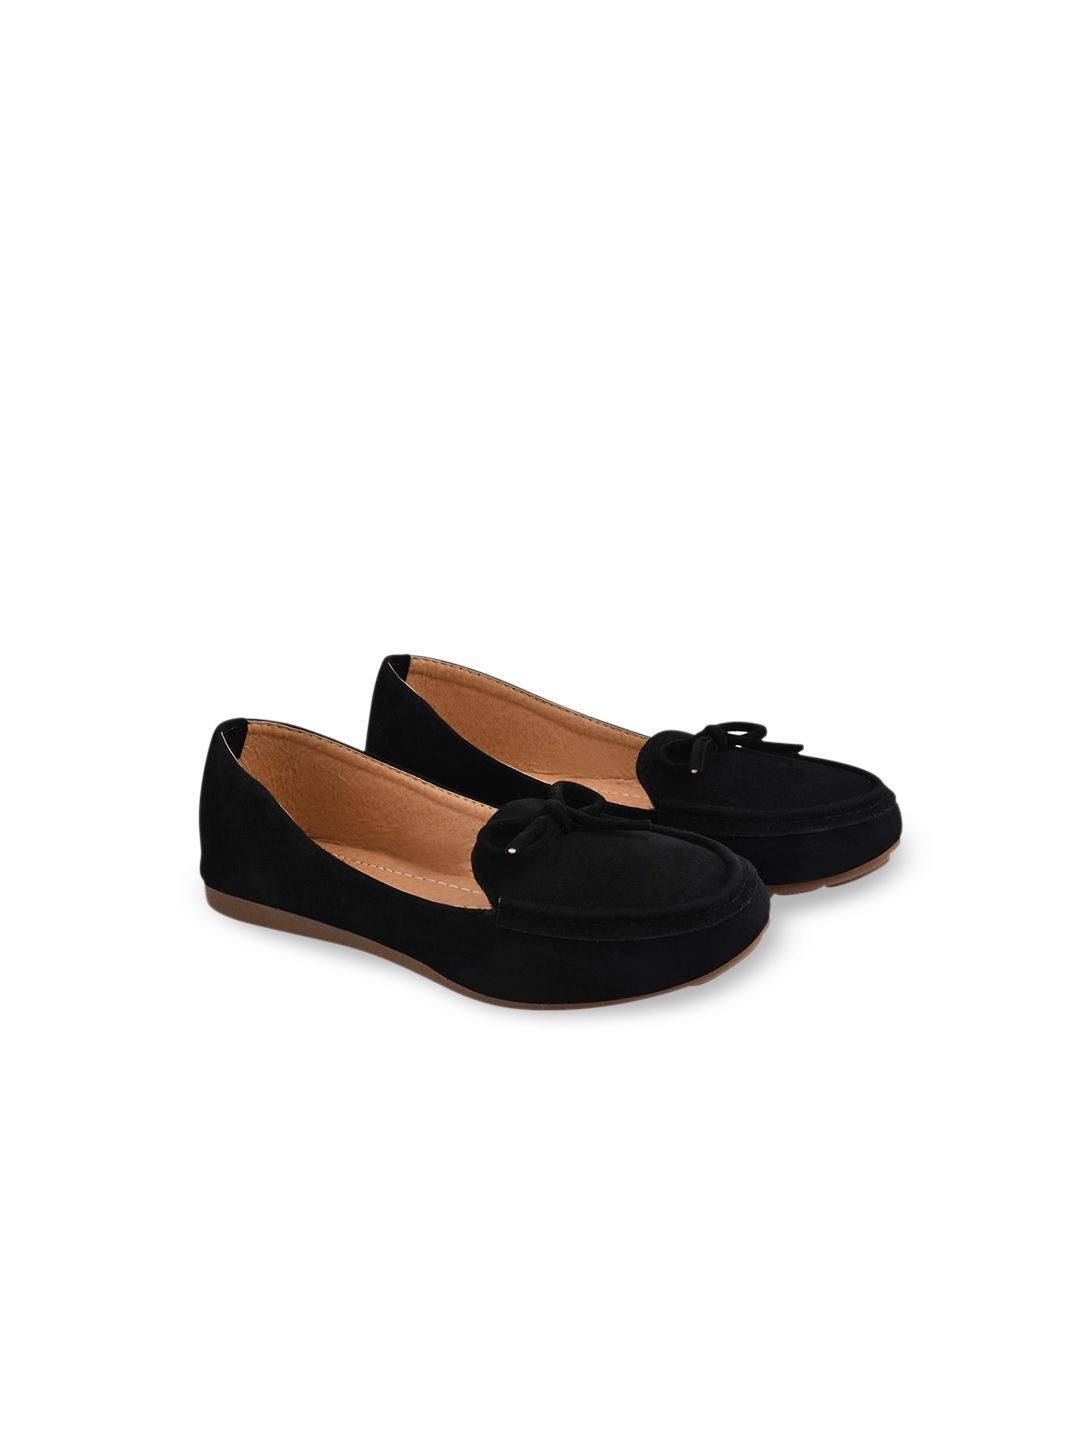 BAESD Girls Round Toe Suede Ballerinas With Bows Price in India